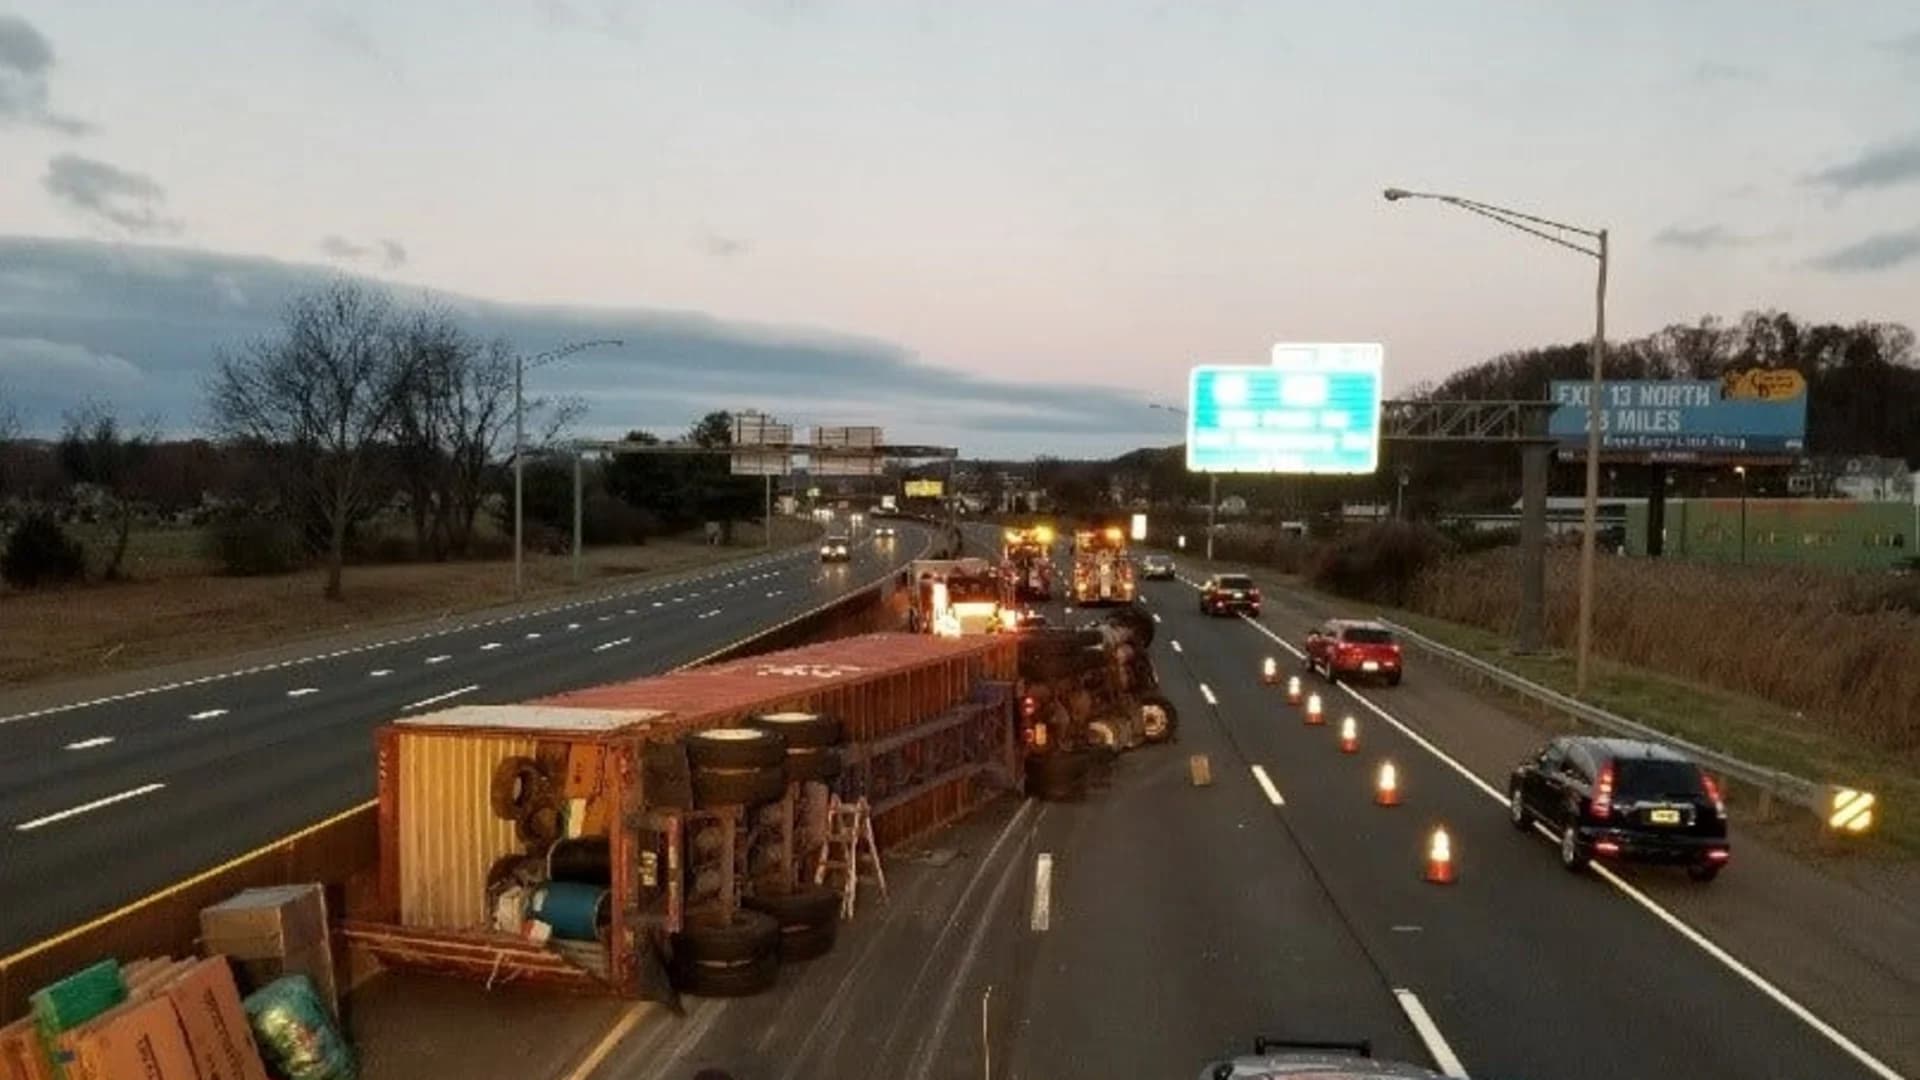 All lanes open following tractor-trailer rollover on I-84 in Danbury